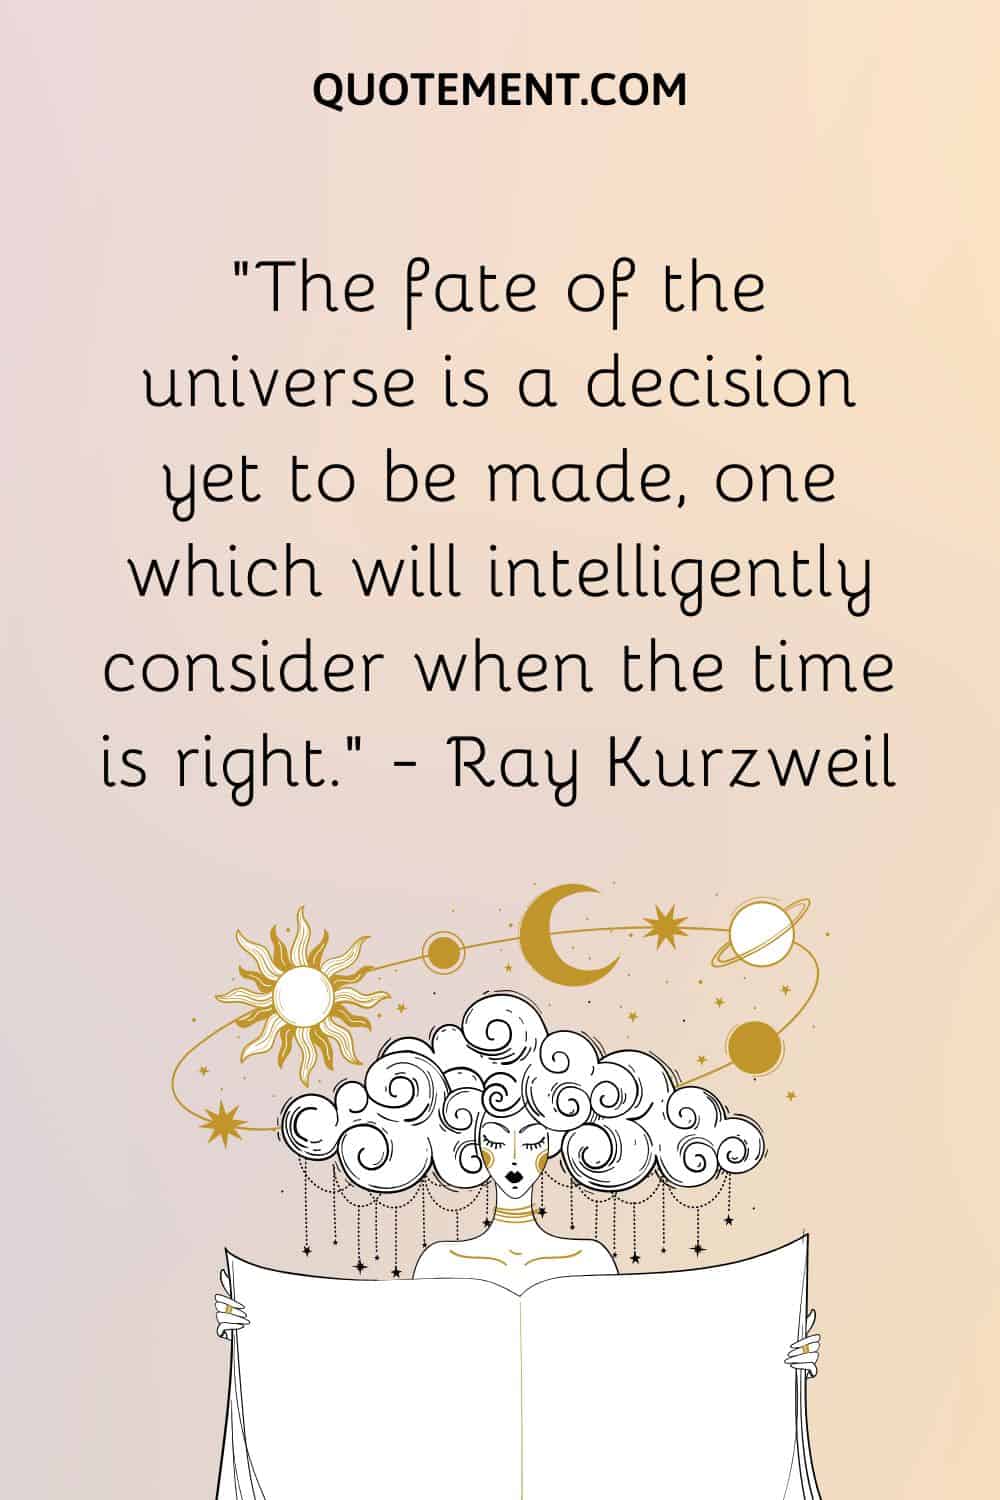 The fate of the universe is a decision yet to be made, one which will intelligently consider when the time is right